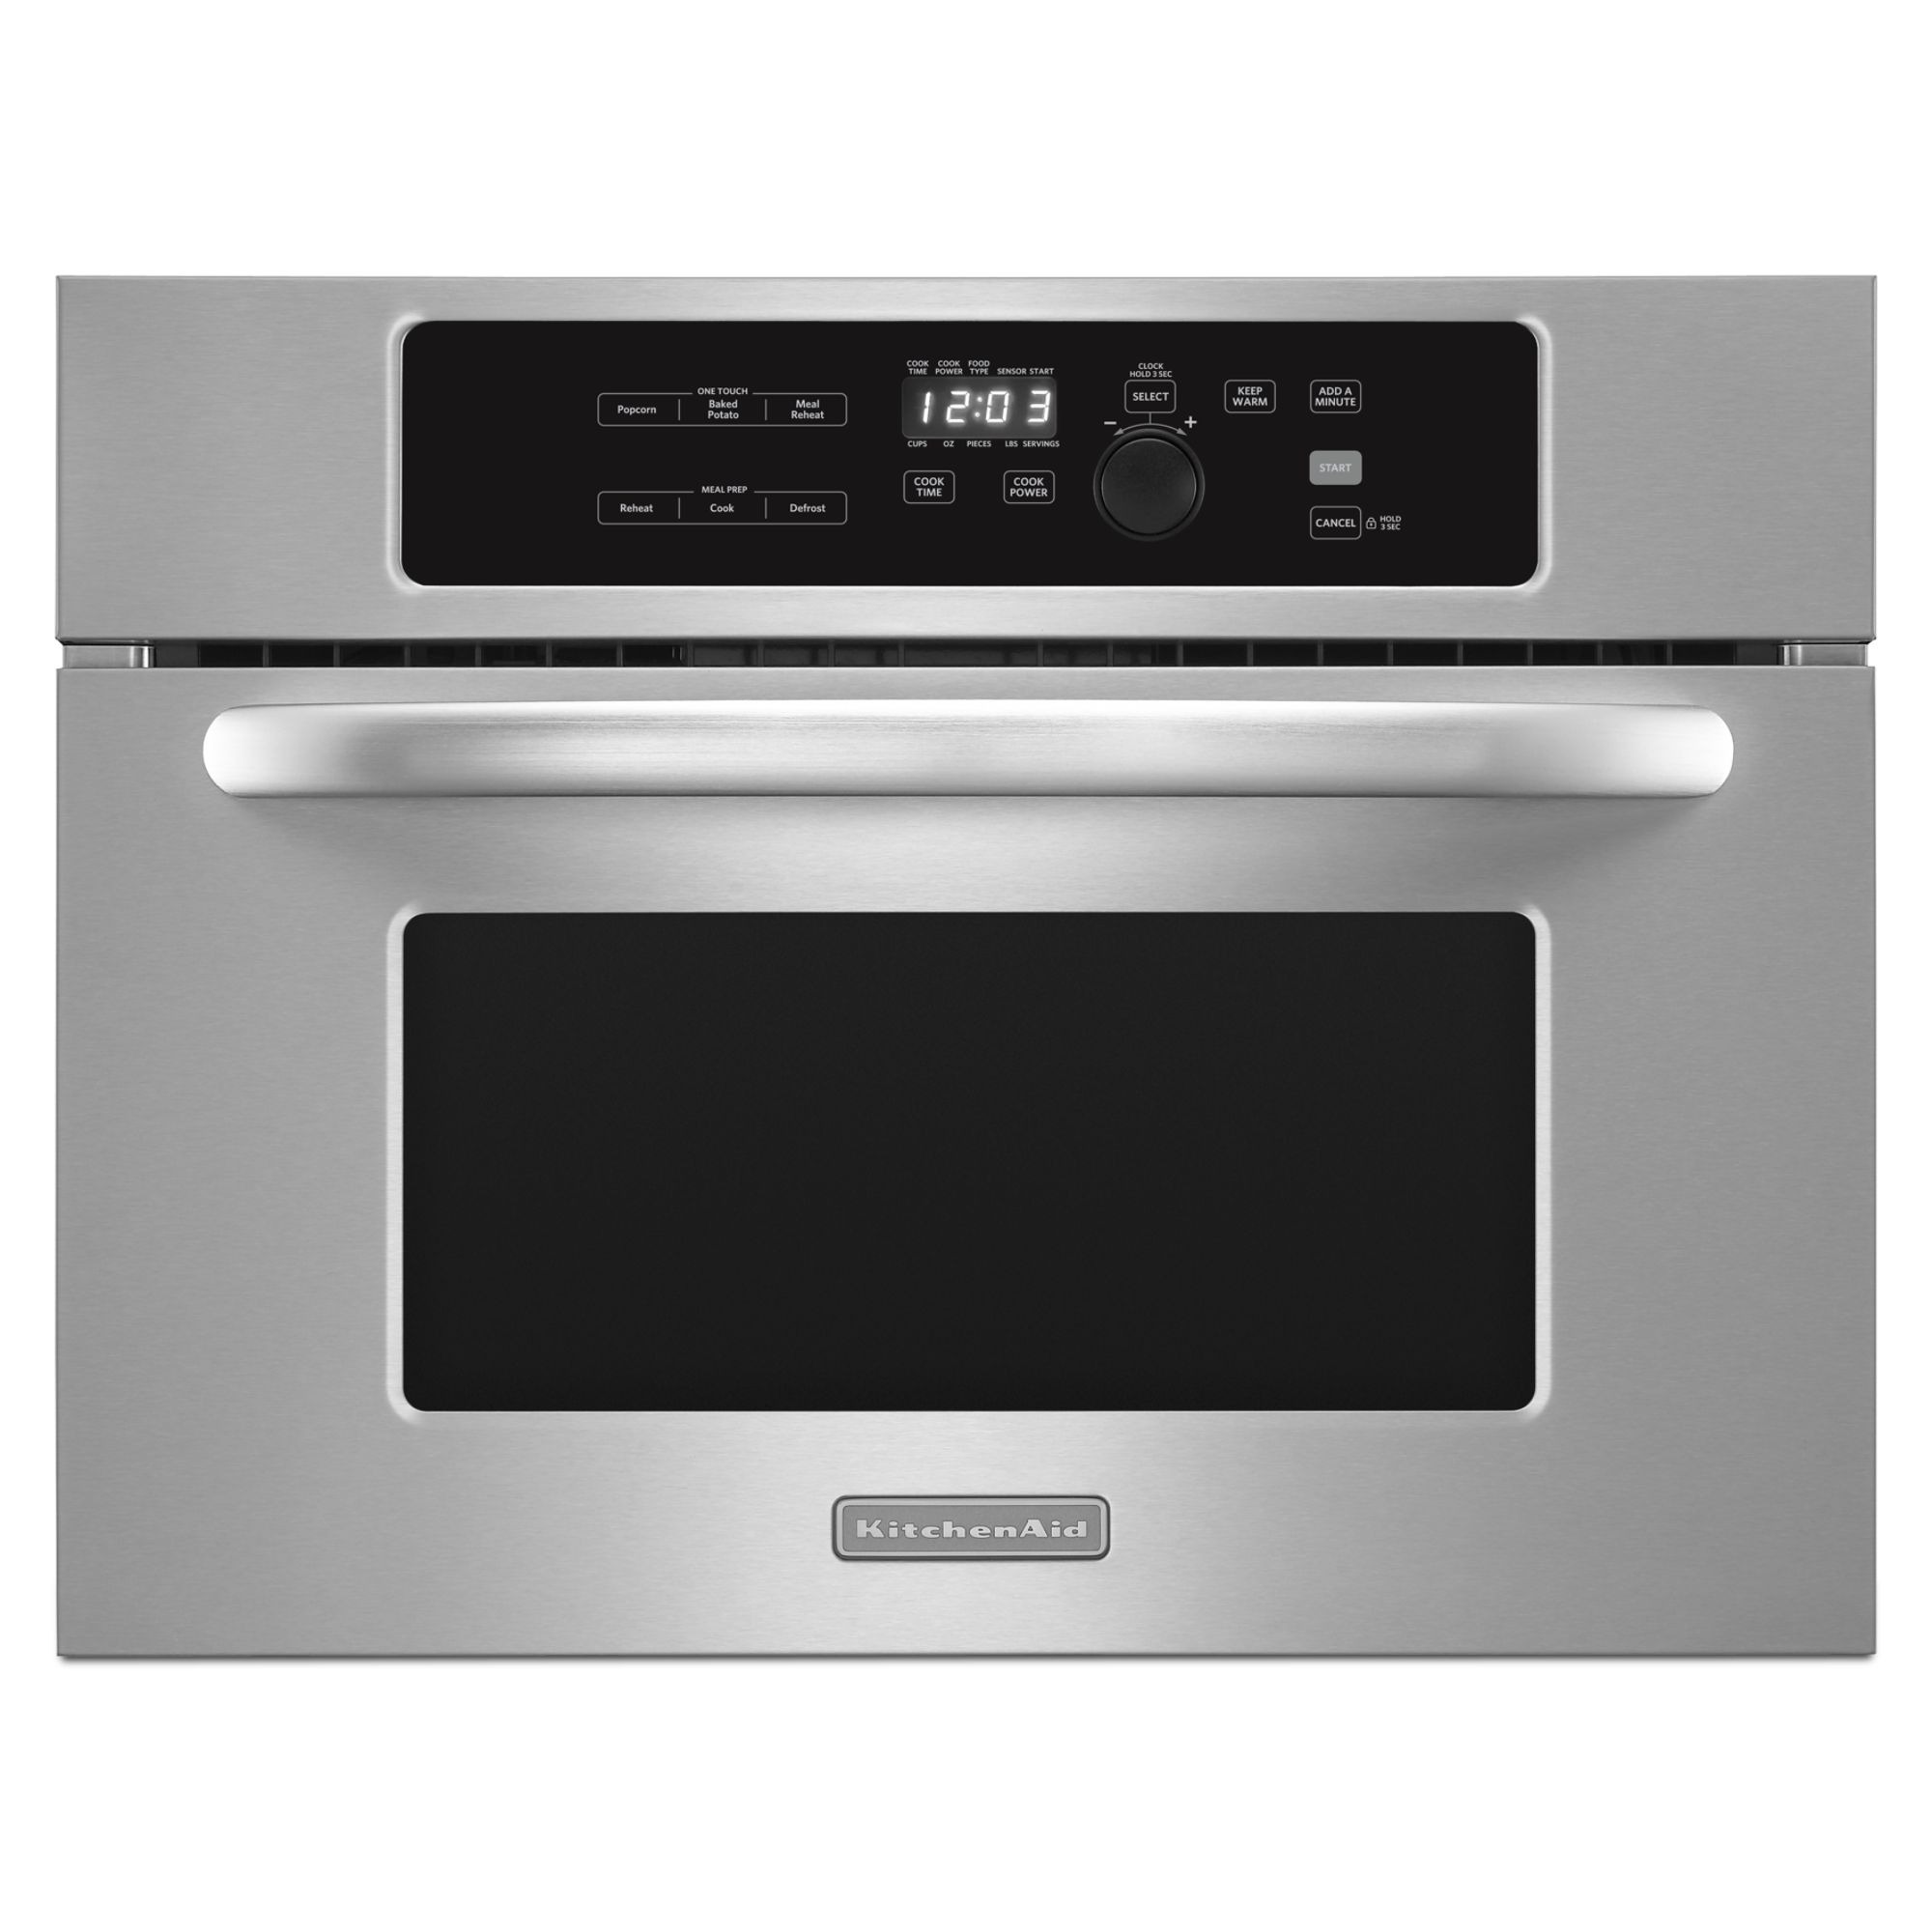 KitchenAid KBMS1454BSS 24” Stainless Steel Built-in Microwave Oven